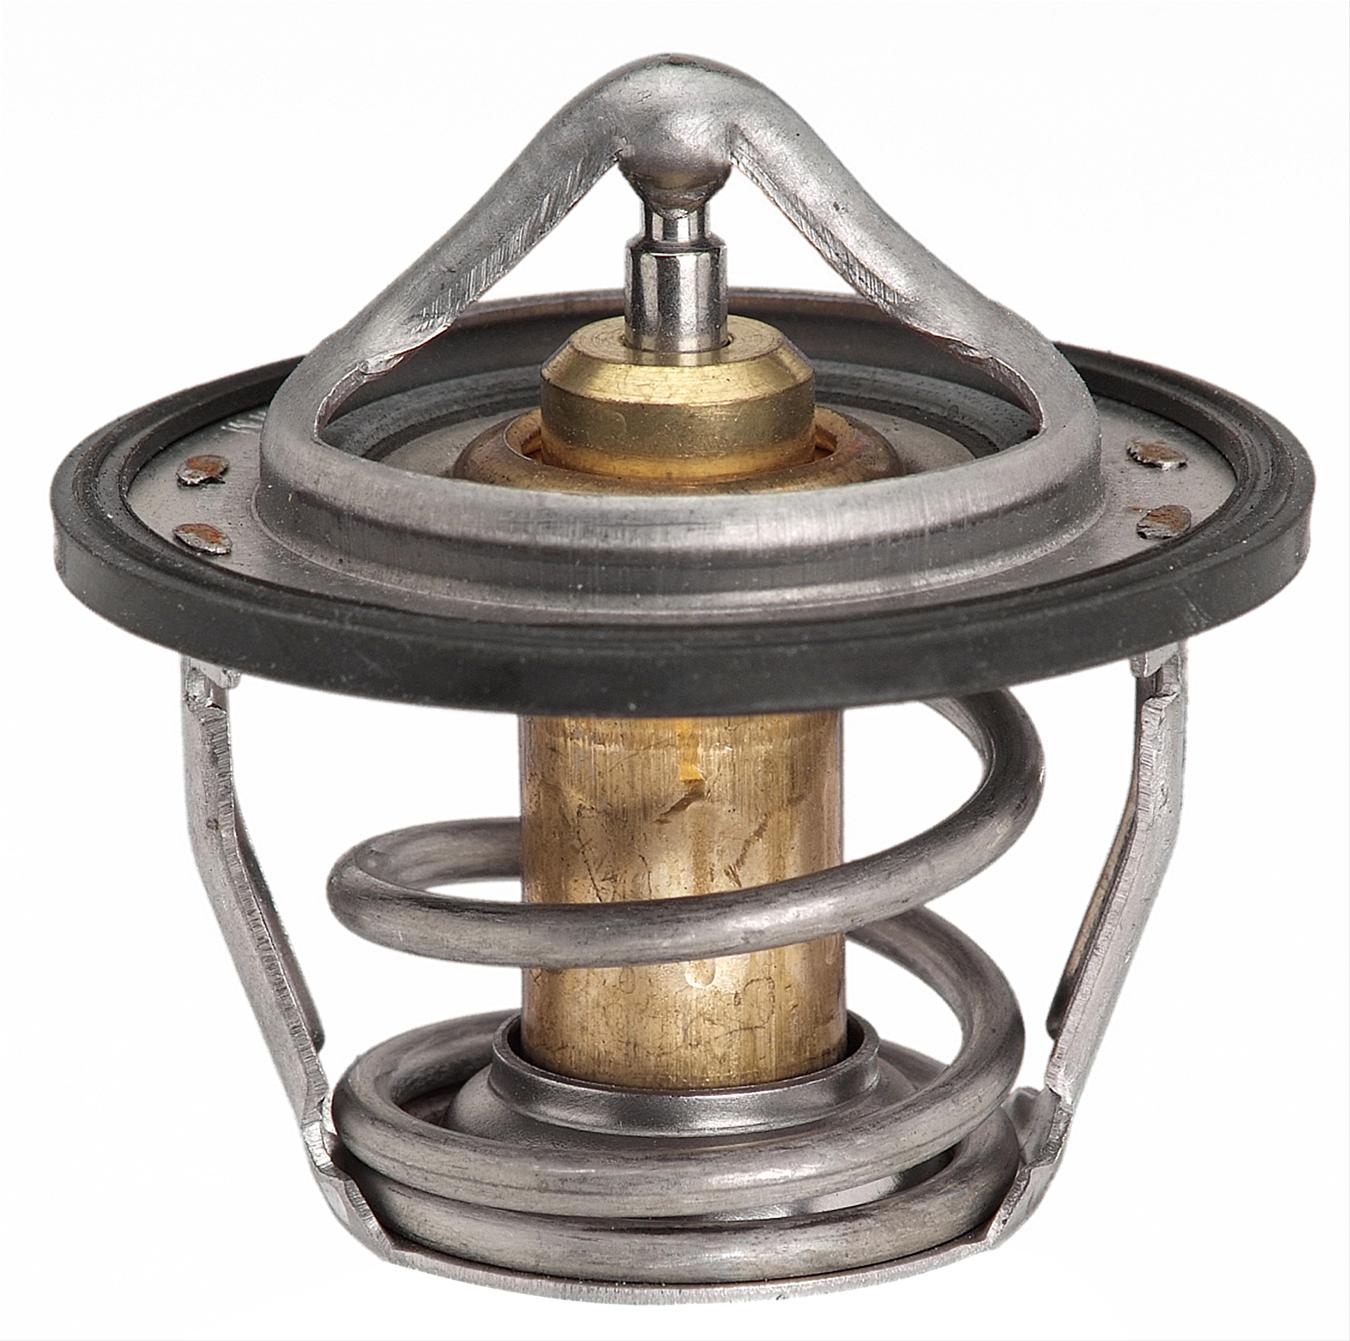 STANT 14698 Thermostat with Stainless Steel Assembly 180 Degrees Fahrenheit